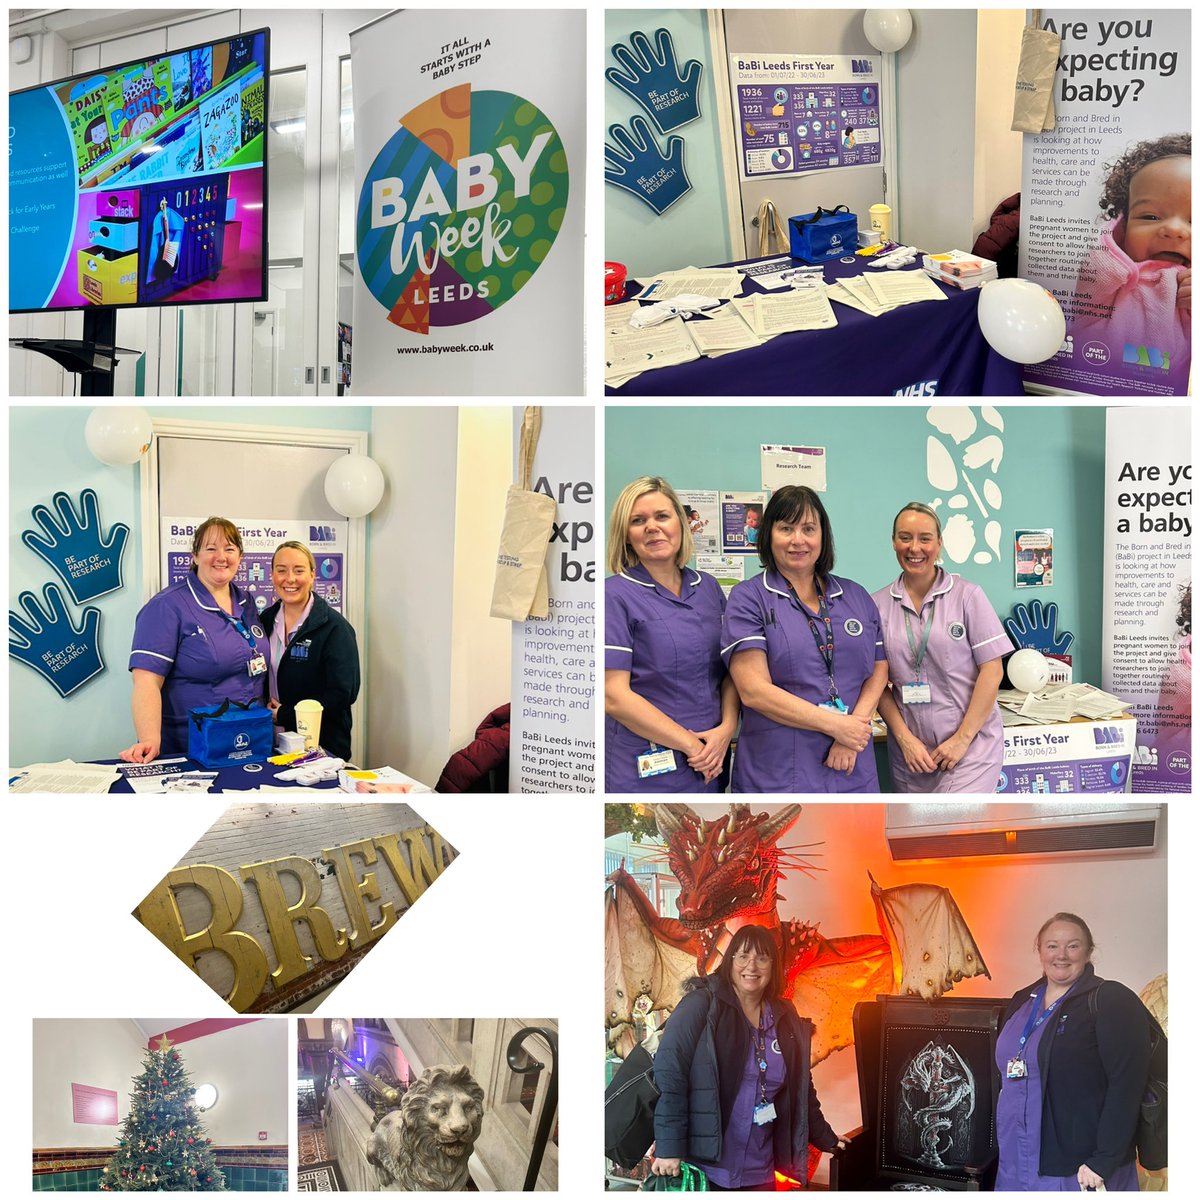 The BABi Leeds team have really enjoyed attending lots of events this week at @BabyWeekUK we can’t wait to see what 2024 has in store! #babyweek #research #babileeds #bib4all @DrKarenElson @crustymcrusty @LthtWomens @jayne_wagstaff @scriven_emily